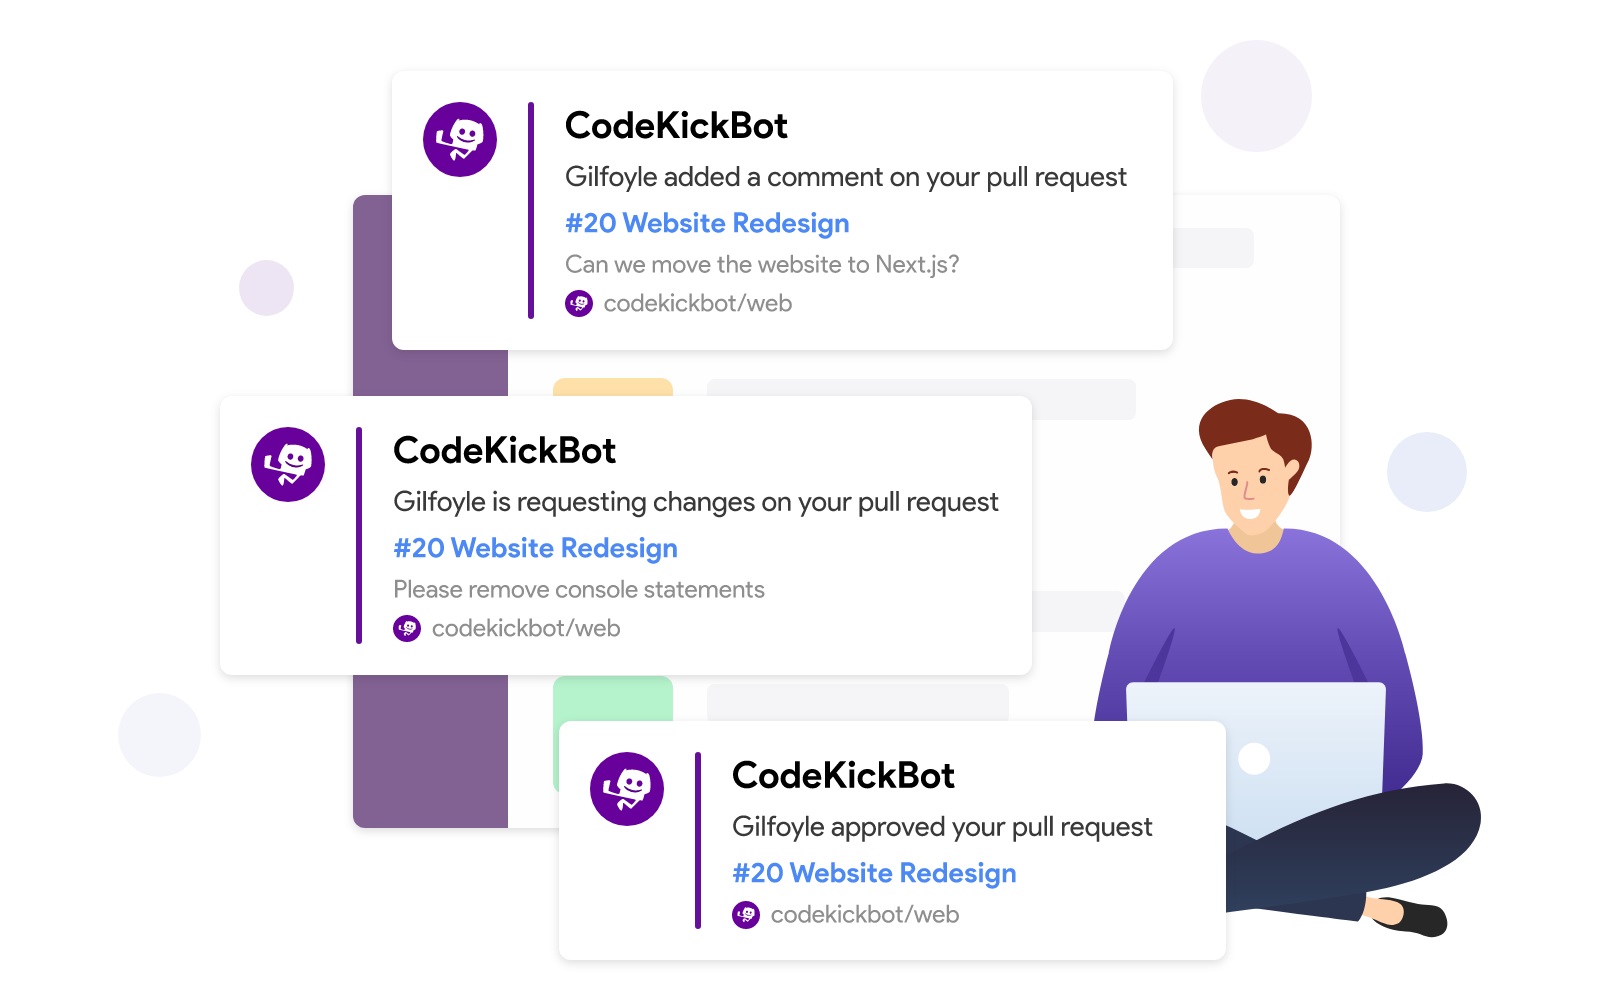 Get feedback from a vast remote working audience about CodeKickBot